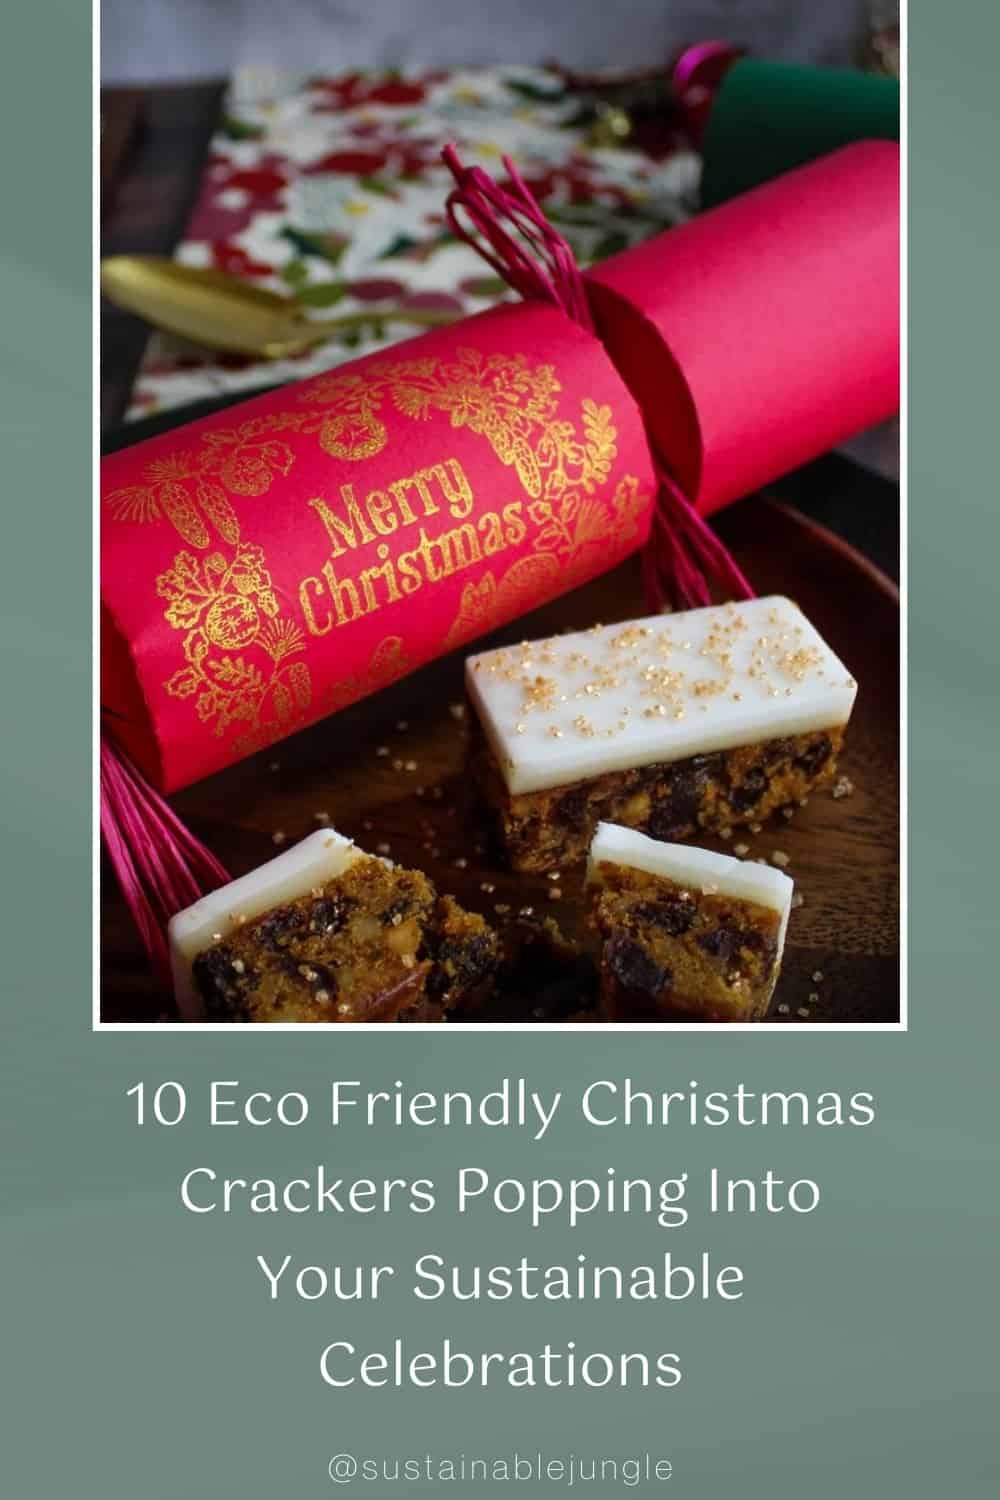 10 Eco Friendly Christmas Crackers Popping Into Your Sustainable Celebrations #ecofriendlychristmascrackers #ecofriendlychristmascrackersUK #ecofriendlychristmascrackersaustralia #bestecofriendlychristmascrackers #ecocrackers #ecochristmascrackers #sustainablejungle Image by Bear & Flo